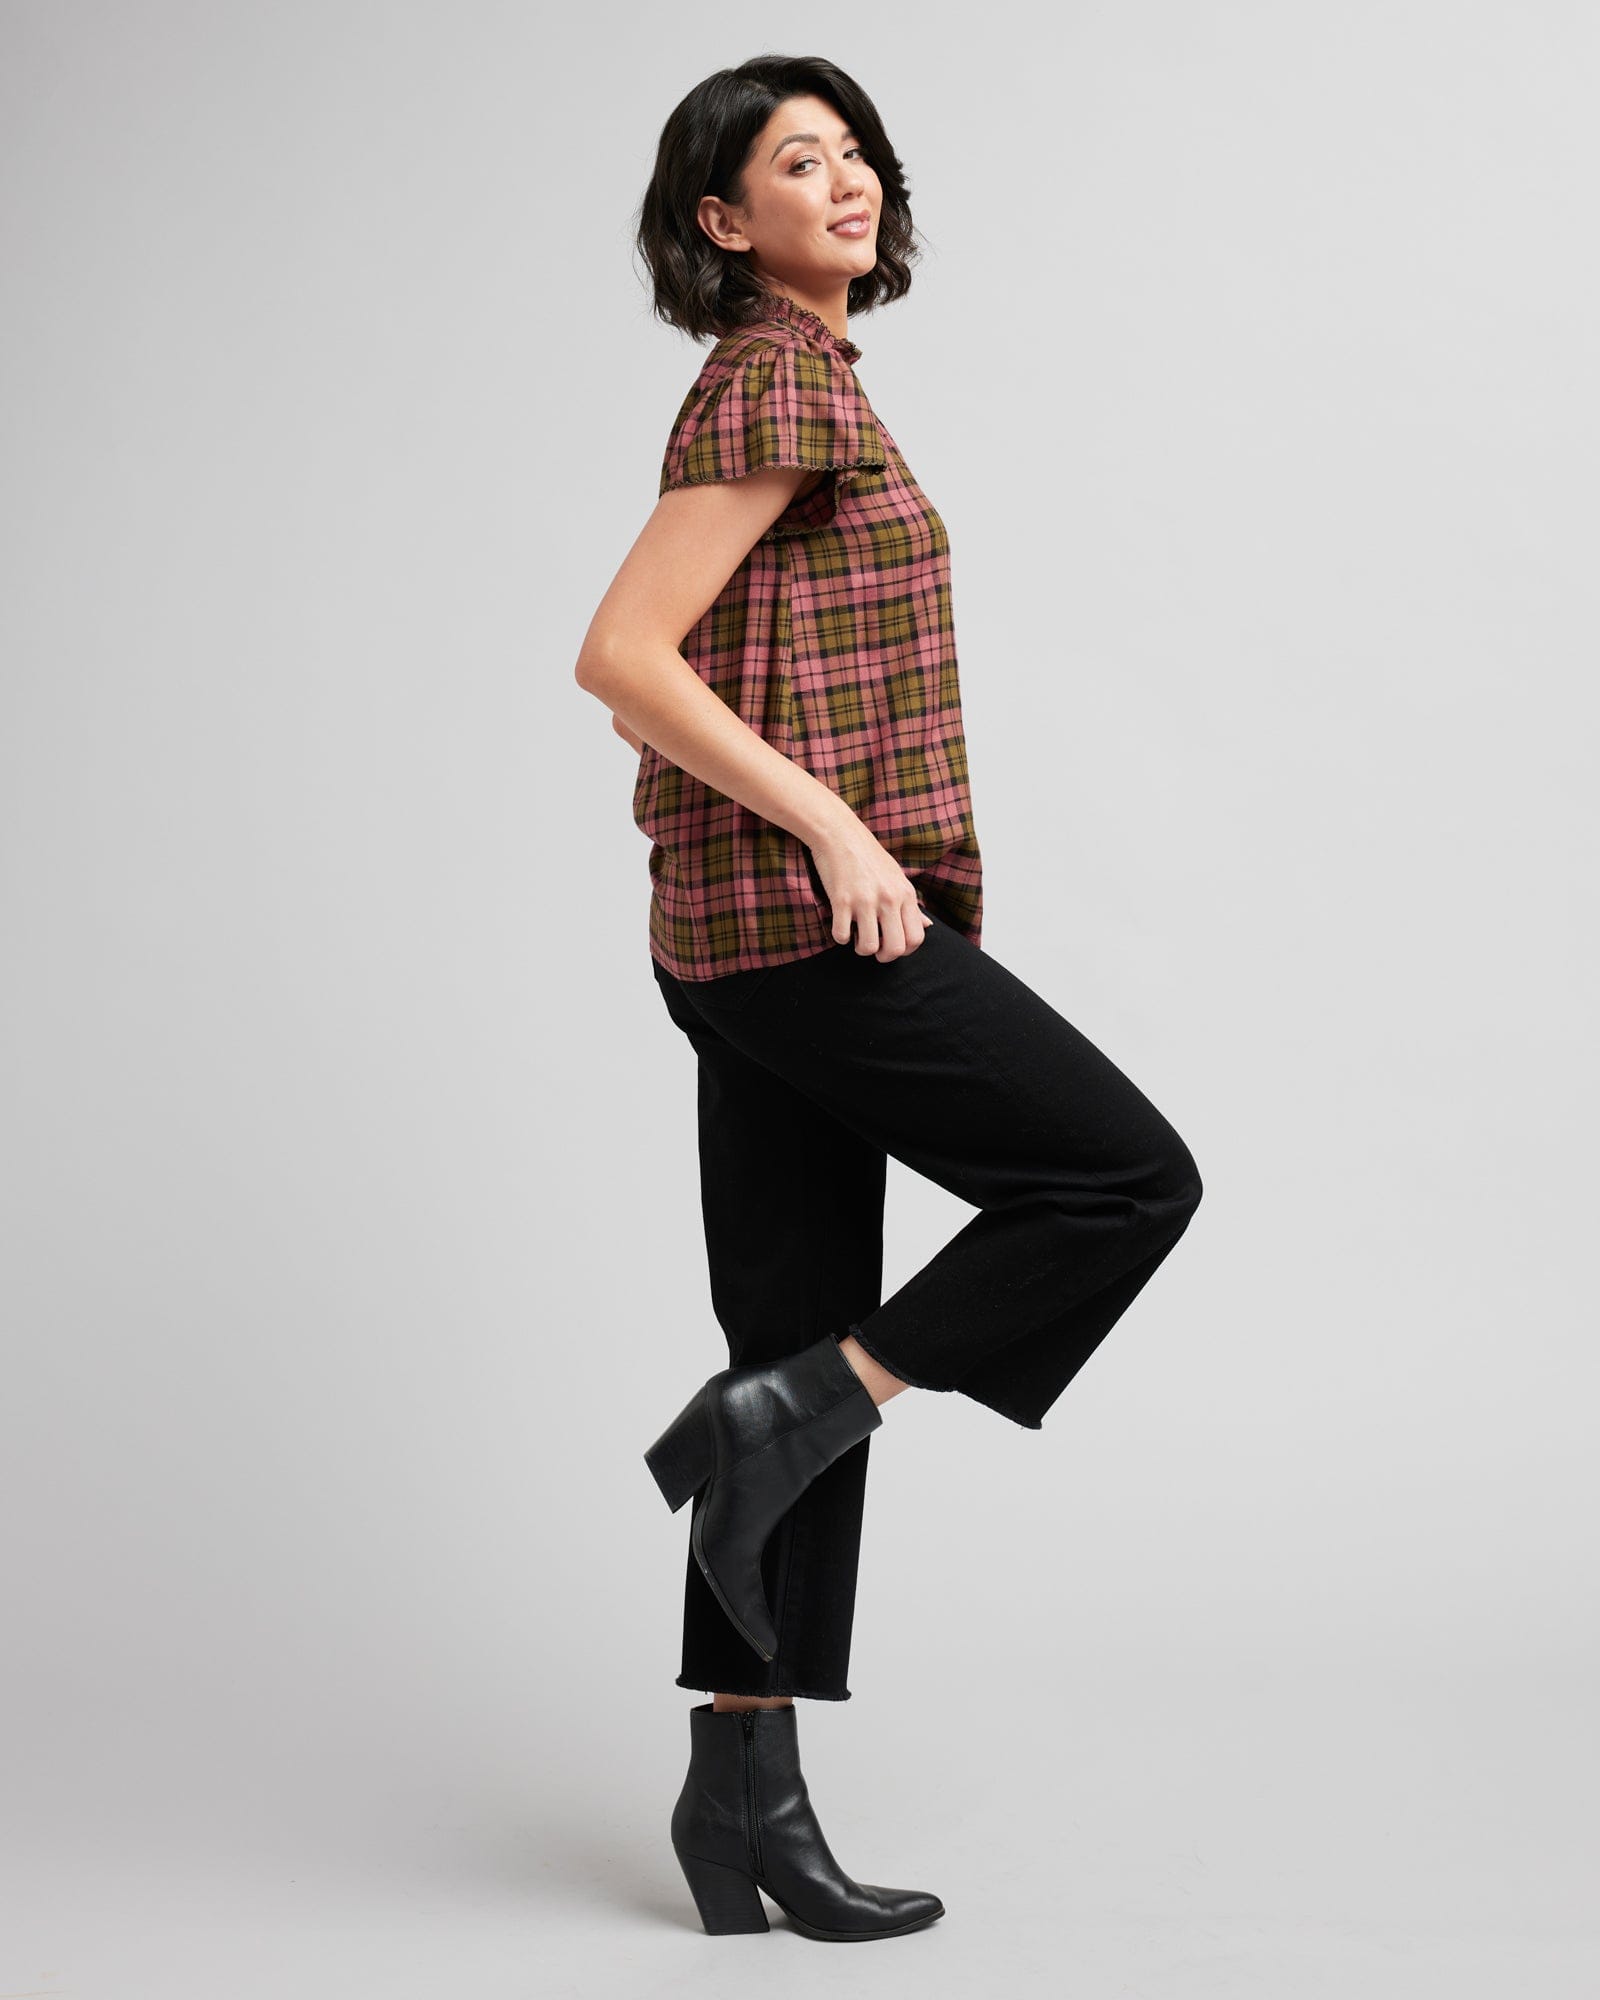 Woman in a short sleeve, mock neck, plaid blouse